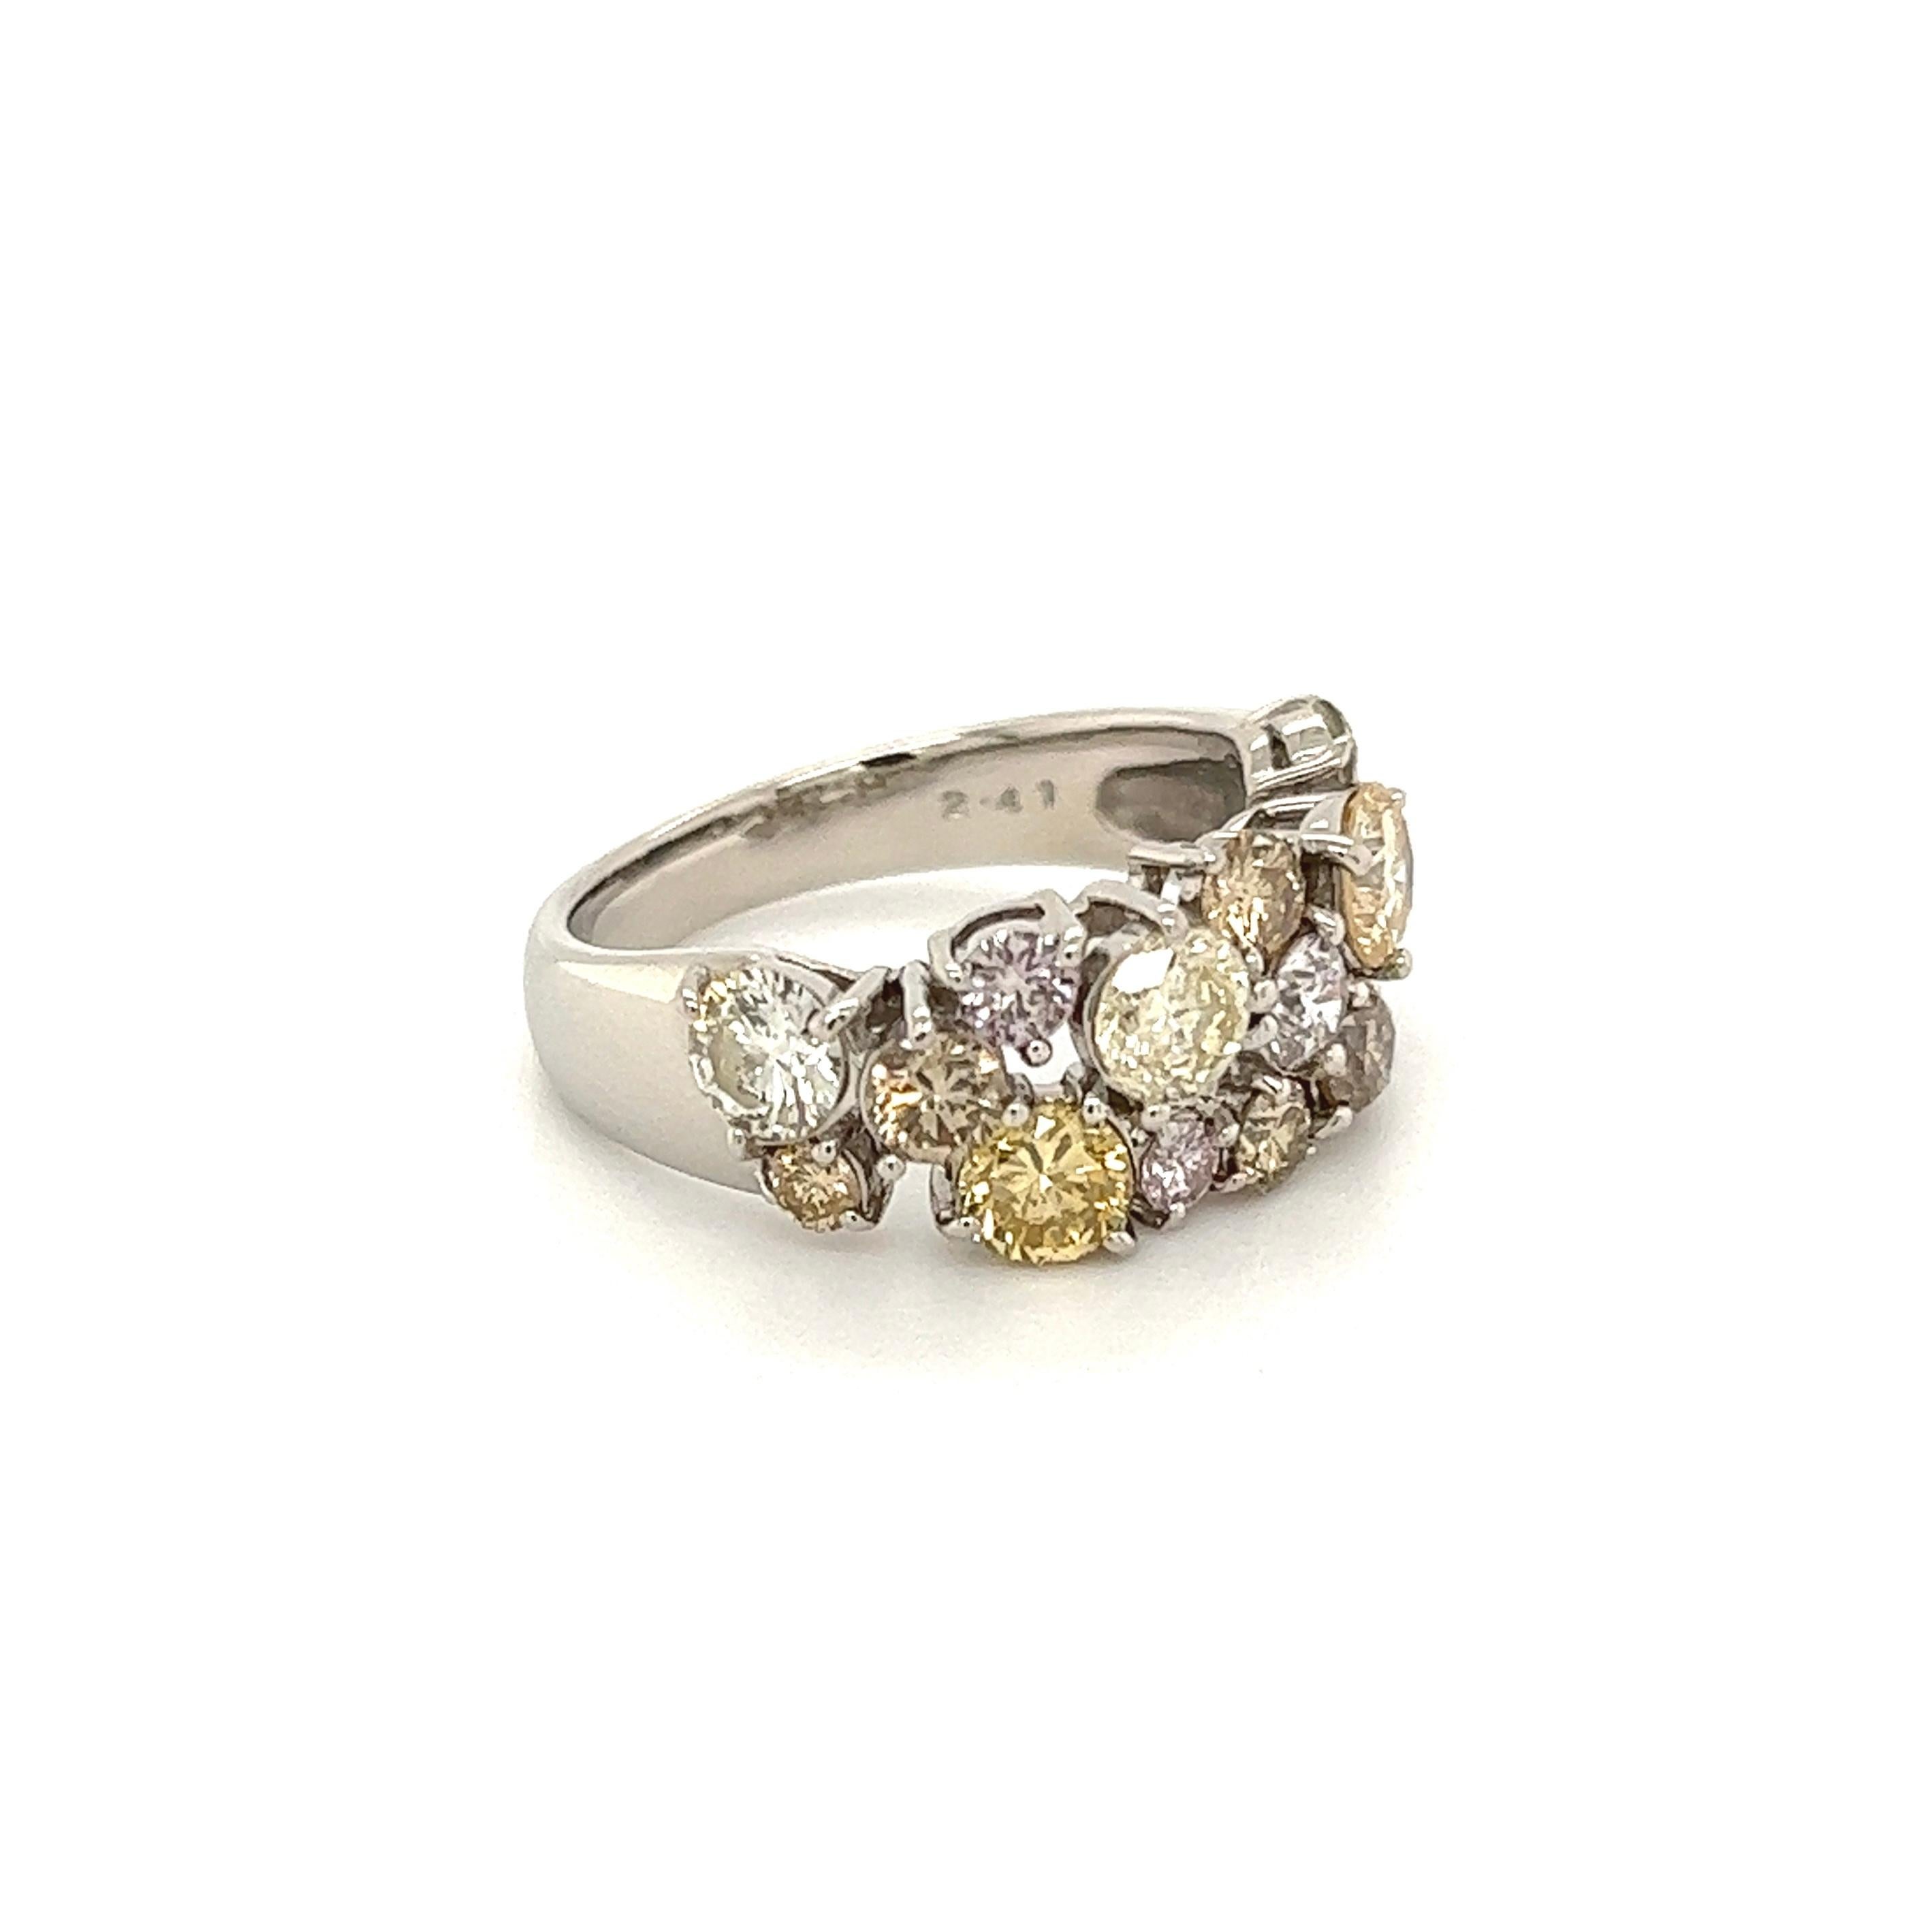 Simply Beautiful! Multi-Color Diamond Cocktail Band Ring. Securely Hand set with Diamonds, Brown to pink, SI-I1, weighing approx. 2.41tcw. Hand crafted in 18 Karat White Gold. Measuring approx. 0.89” w x 0.84” h x 0.36” d. Ring size 6.25, we offer